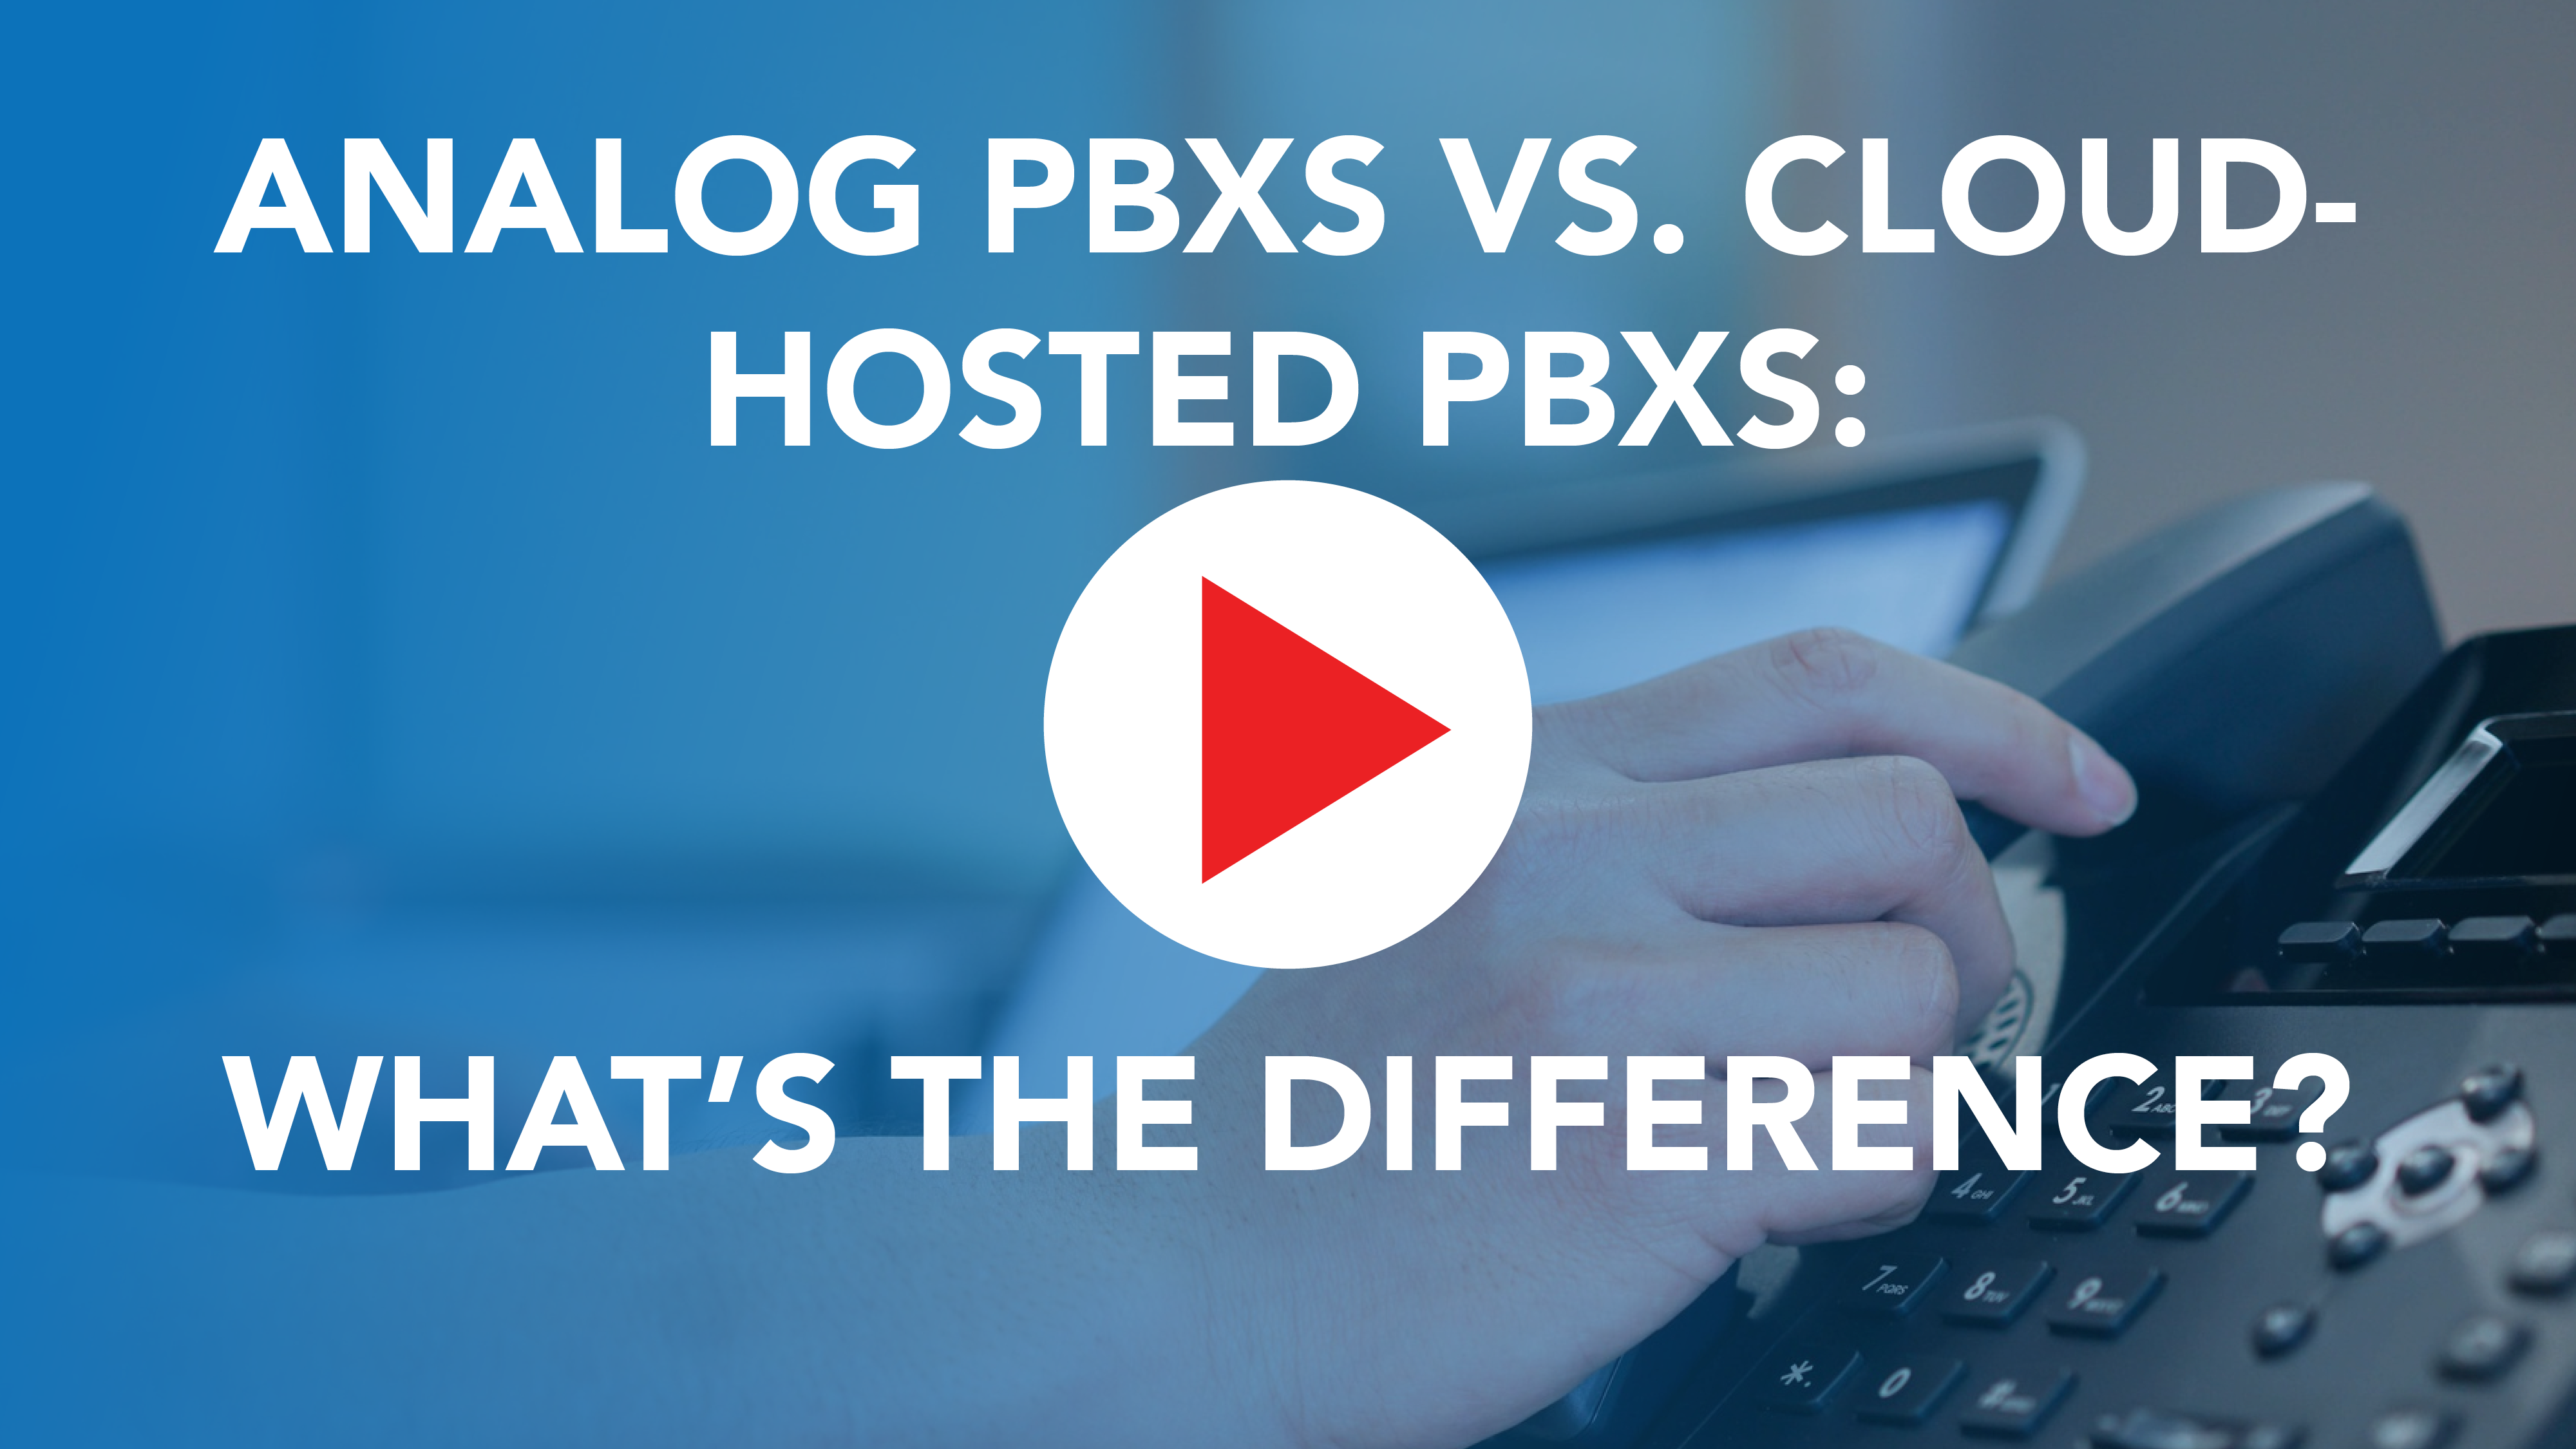 Analog PBXs vs. Cloud-Hosted PBXs: What’s the difference?